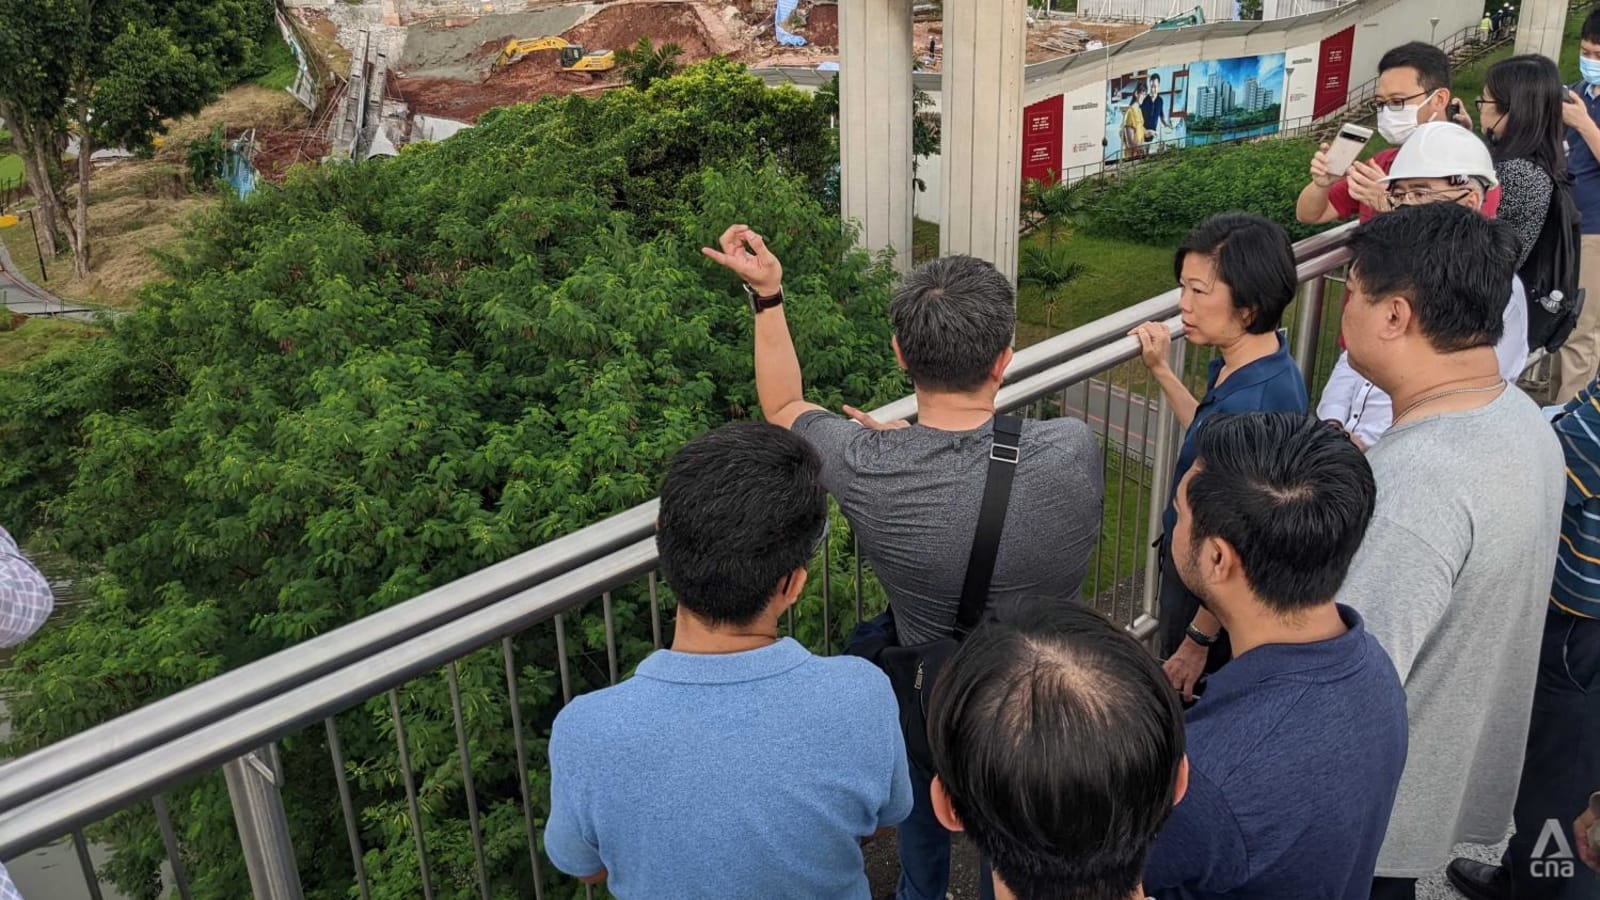 Damage caused by Clementi BTO landslide ‘quite extensive’ but unlikely to delay key collection: MP